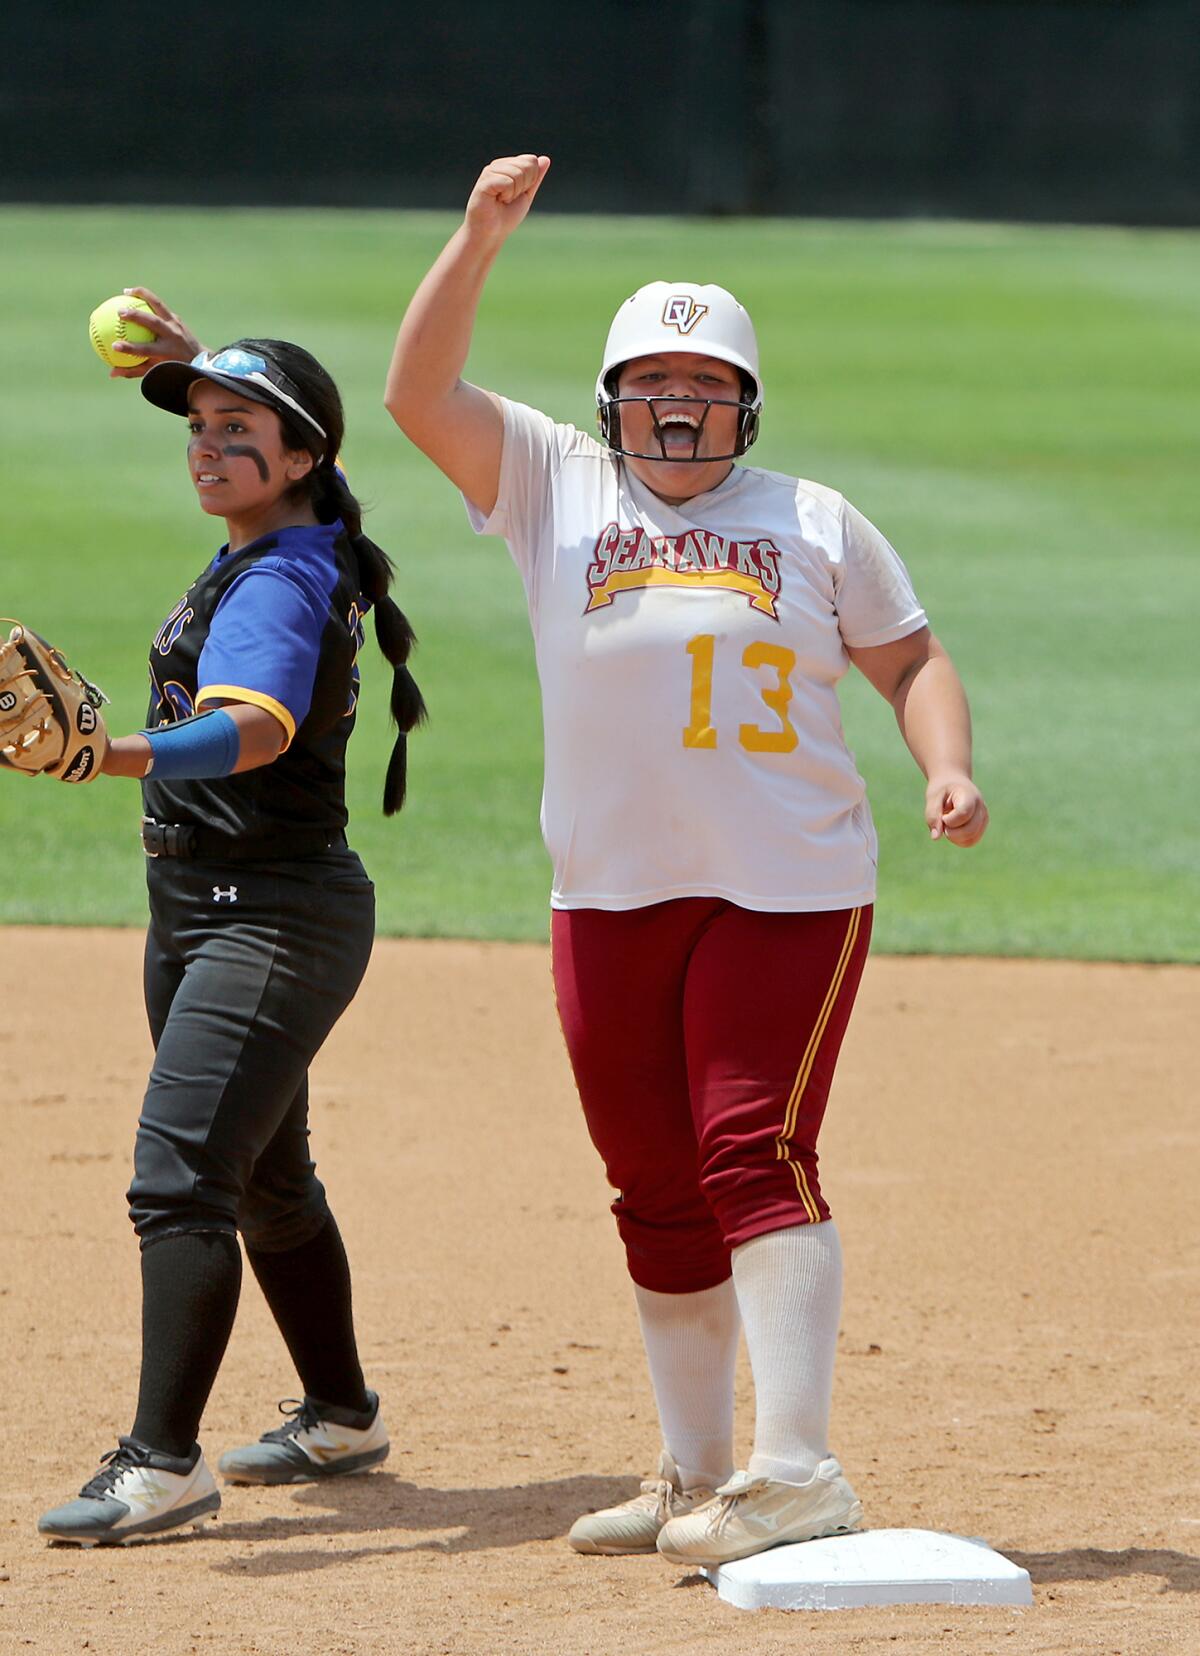 Ocean View senior Nivea Armenta (13) cheers after she hit a double during the seventh inning against Western Christian.